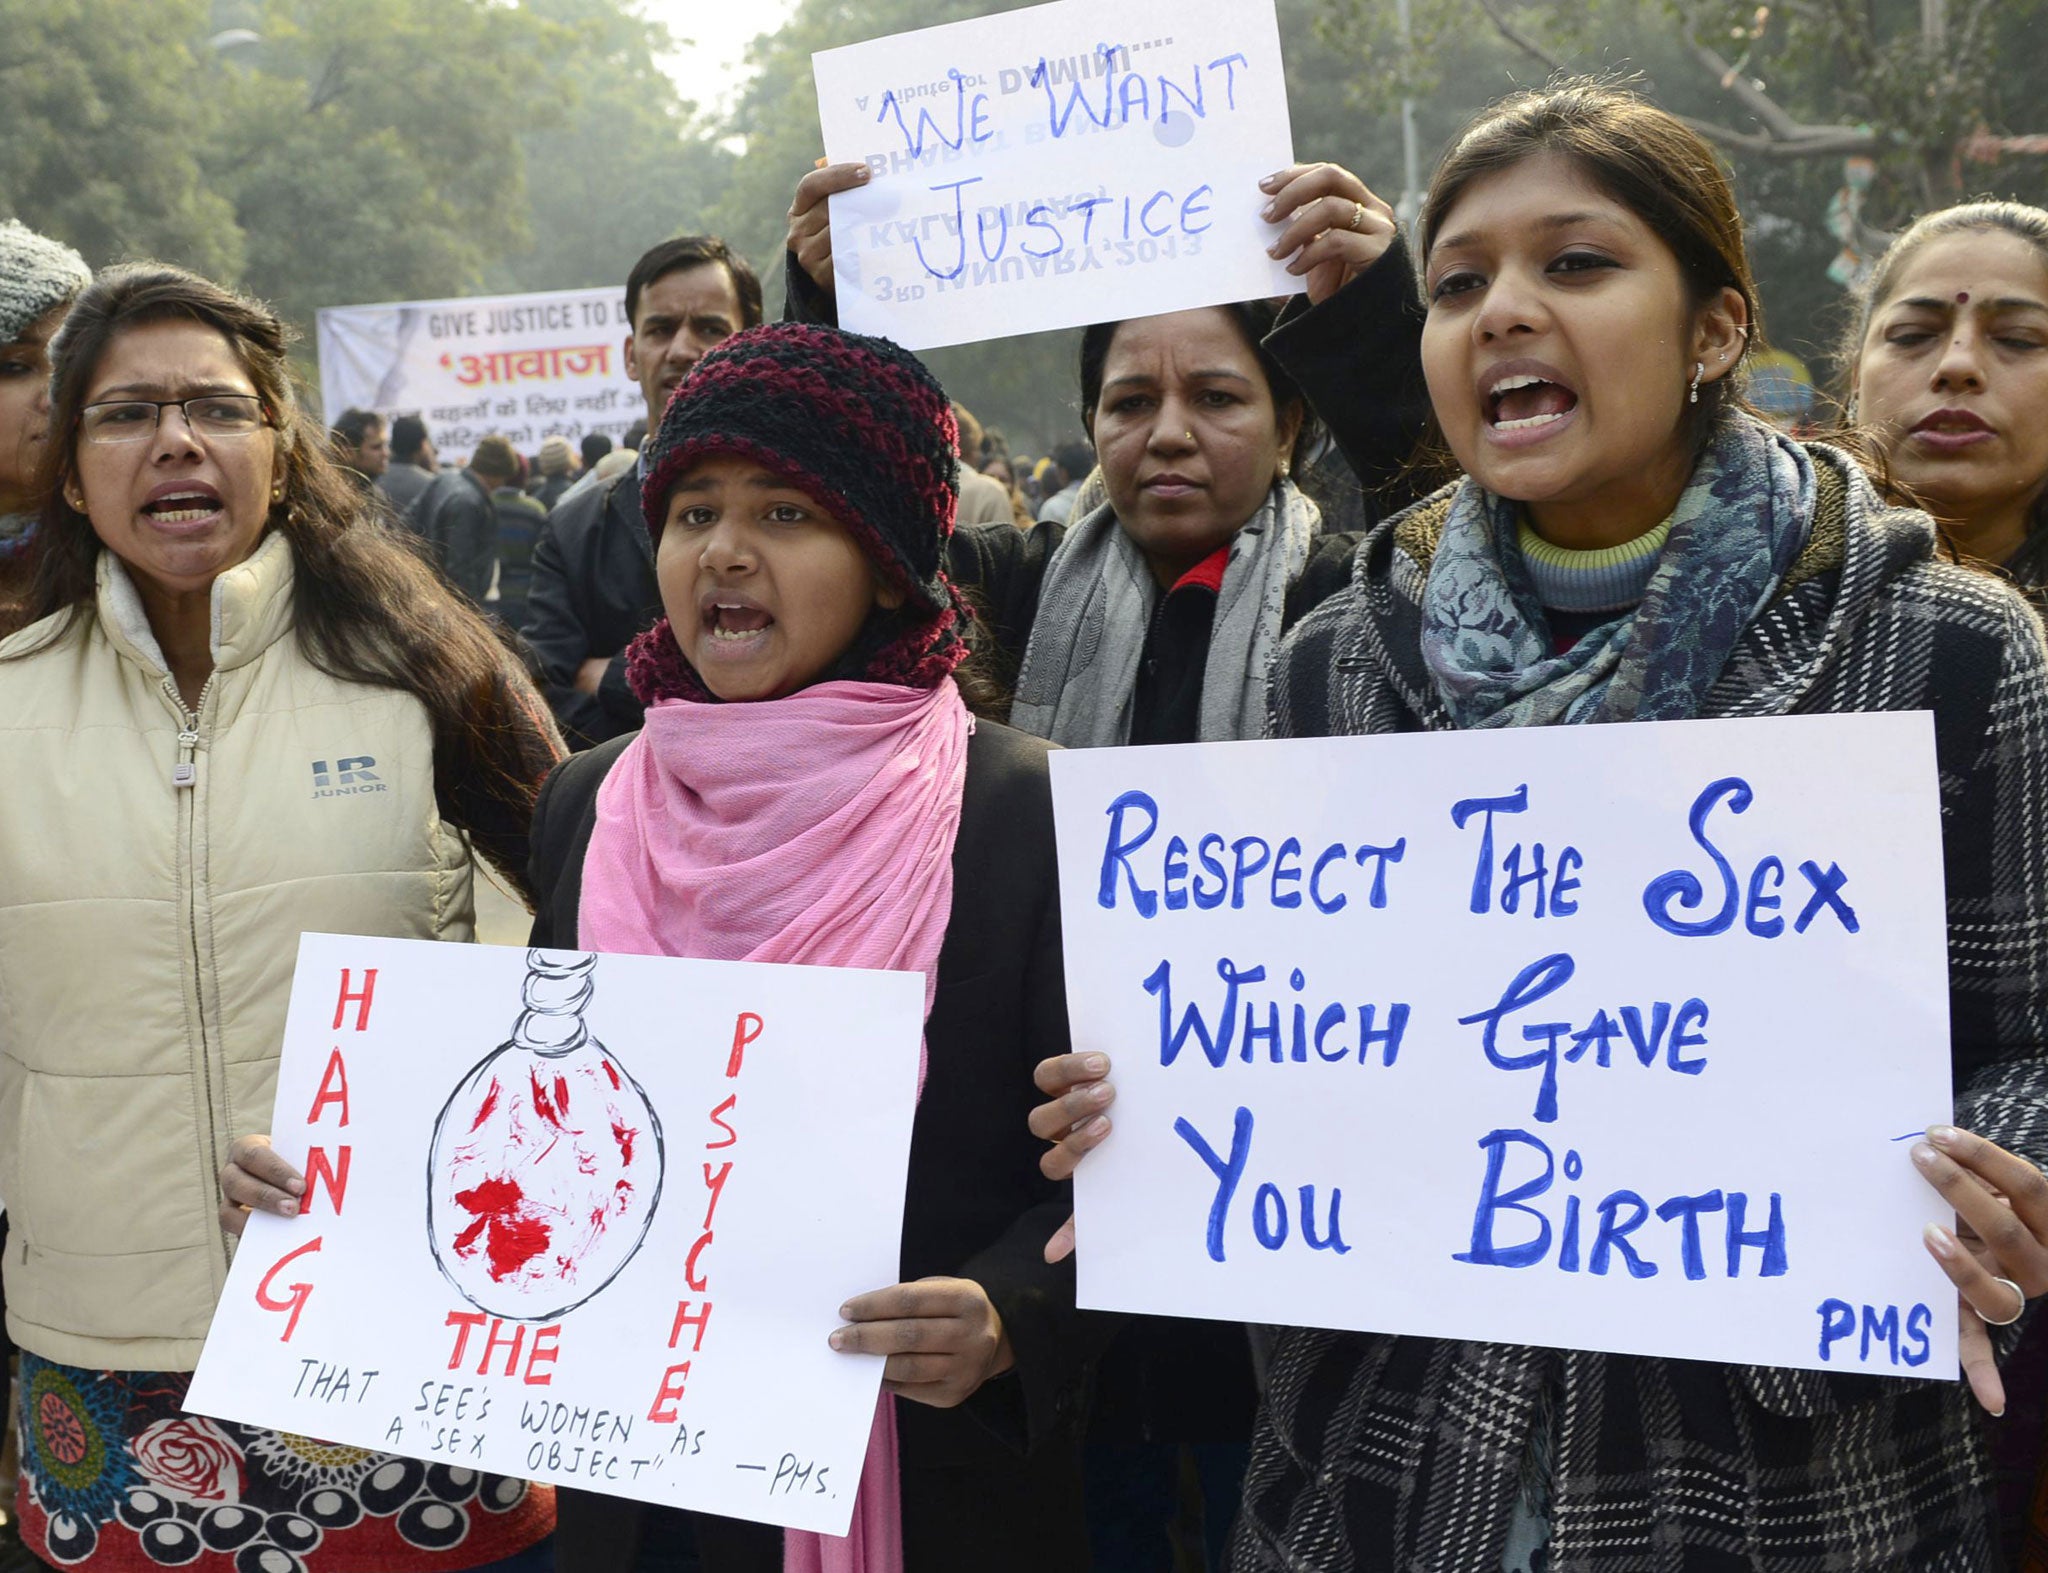 The rape case led to frequent demonstrations in Delhi